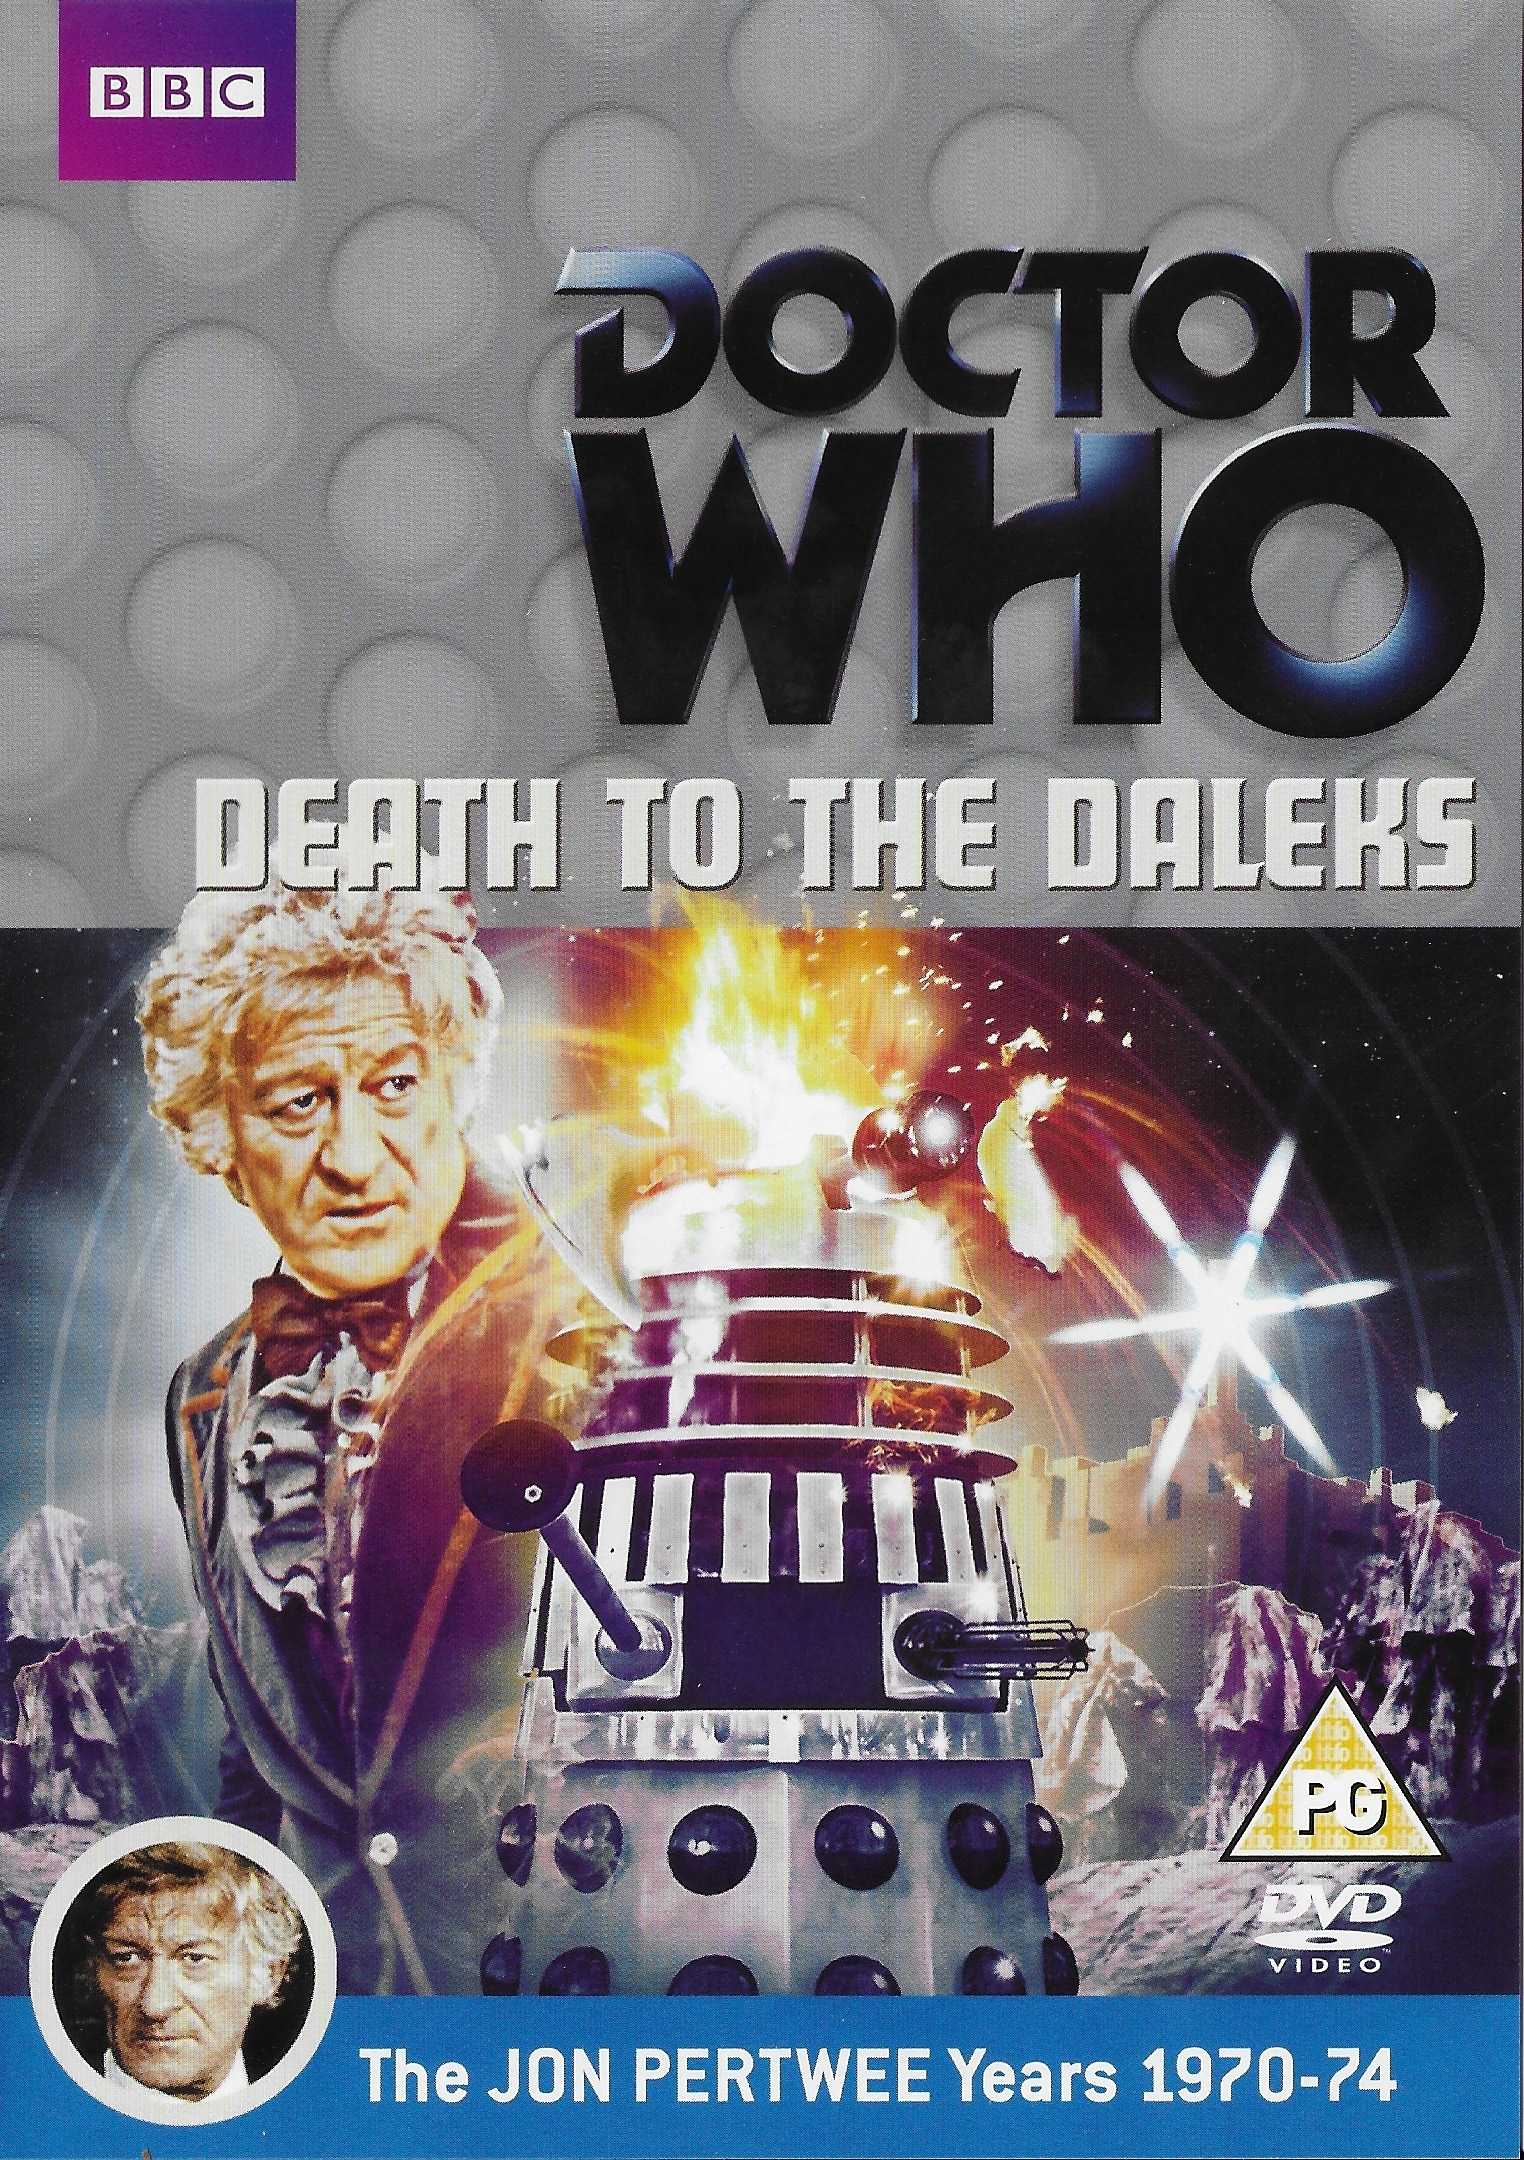 Picture of BBCDVD 3483 Doctor Who - Death to the Daleks by artist Terry Nation from the BBC records and Tapes library